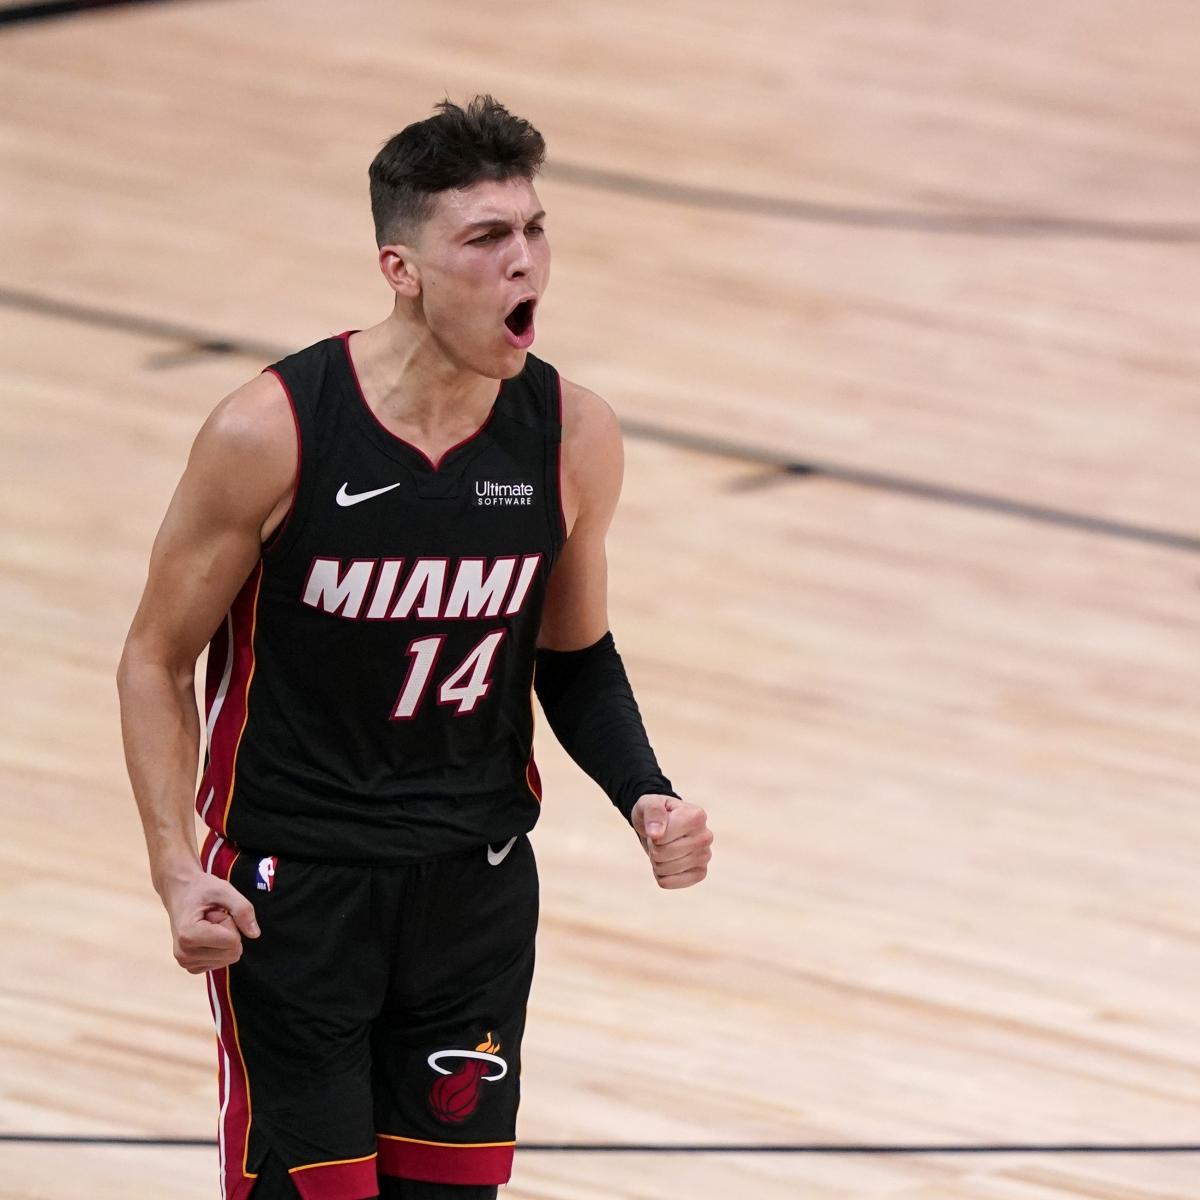 Heat S Tyler Herro Has Nba S Top Selling Jersey After 37 Point Game Vs Celtics Bleacher Report Latest News Videos And Highlights